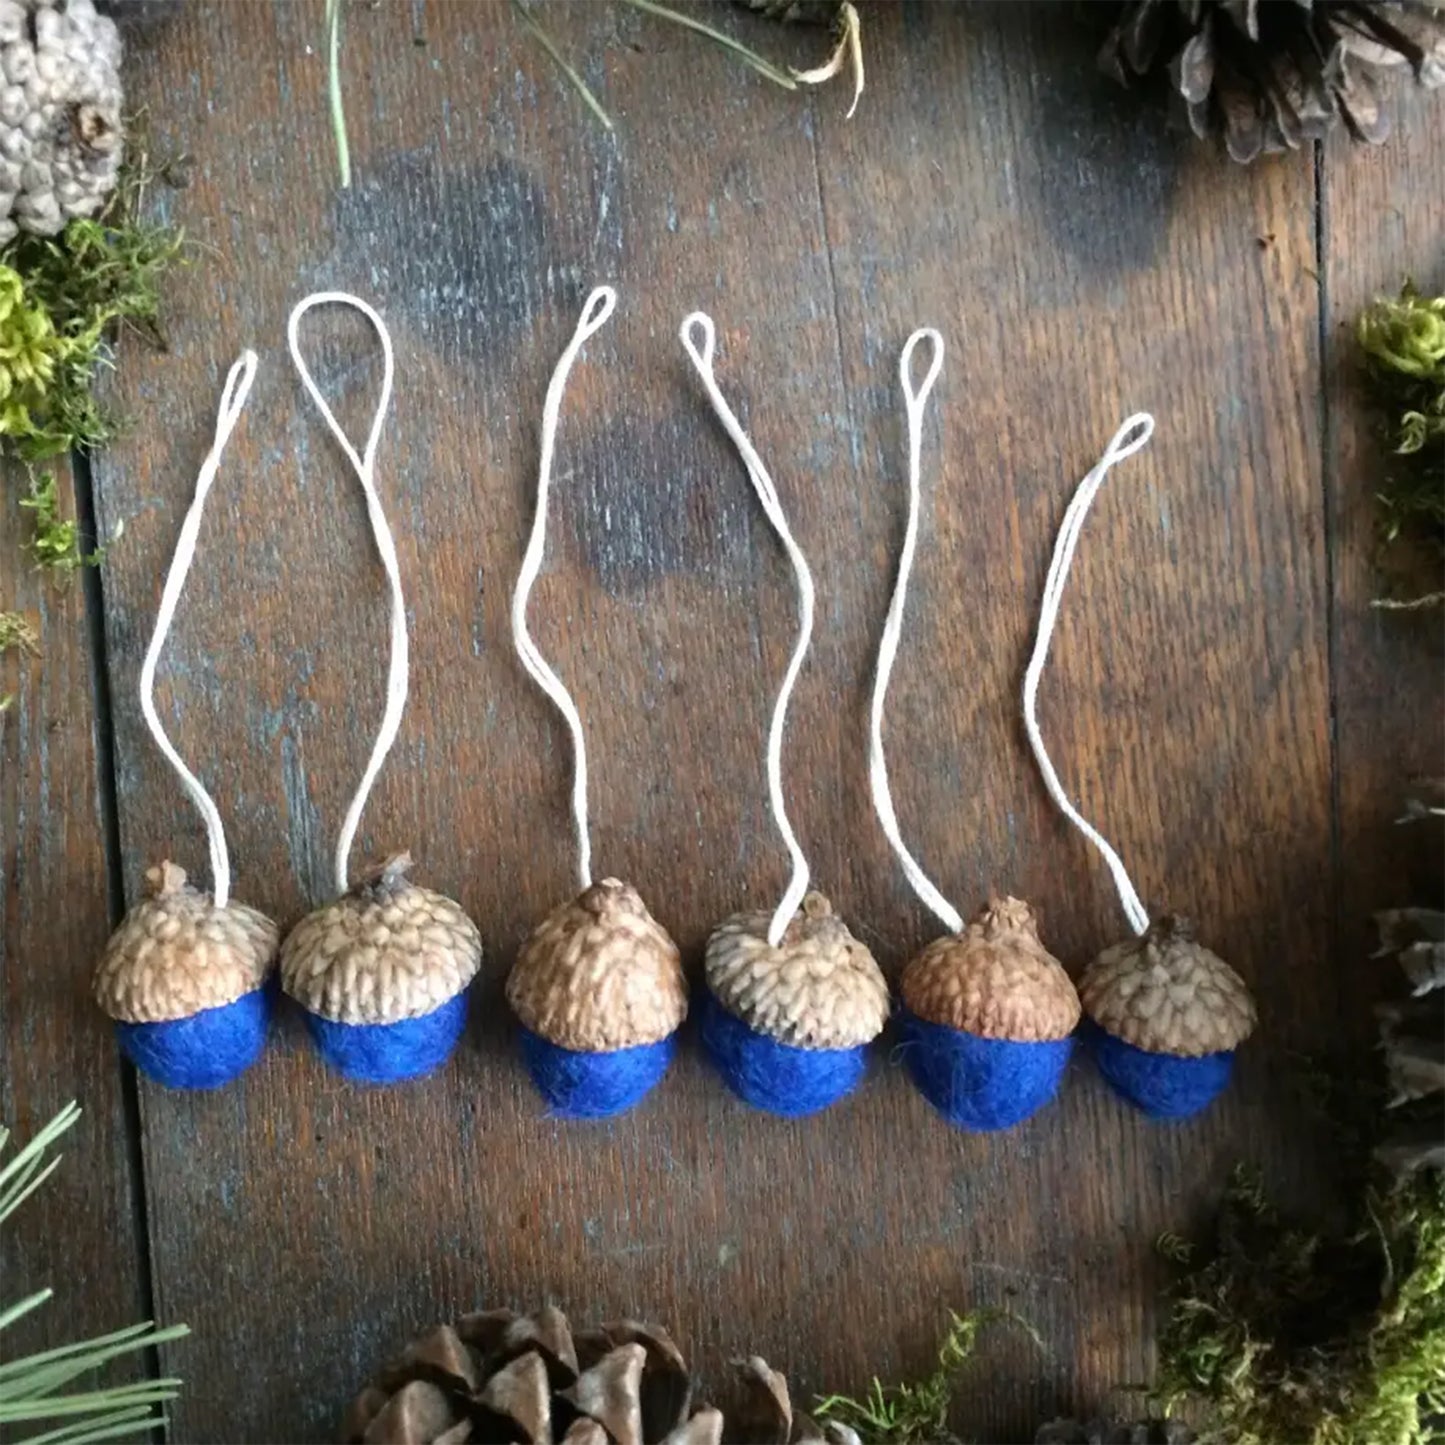 Blueberry Blue Felted Acorn Ornament